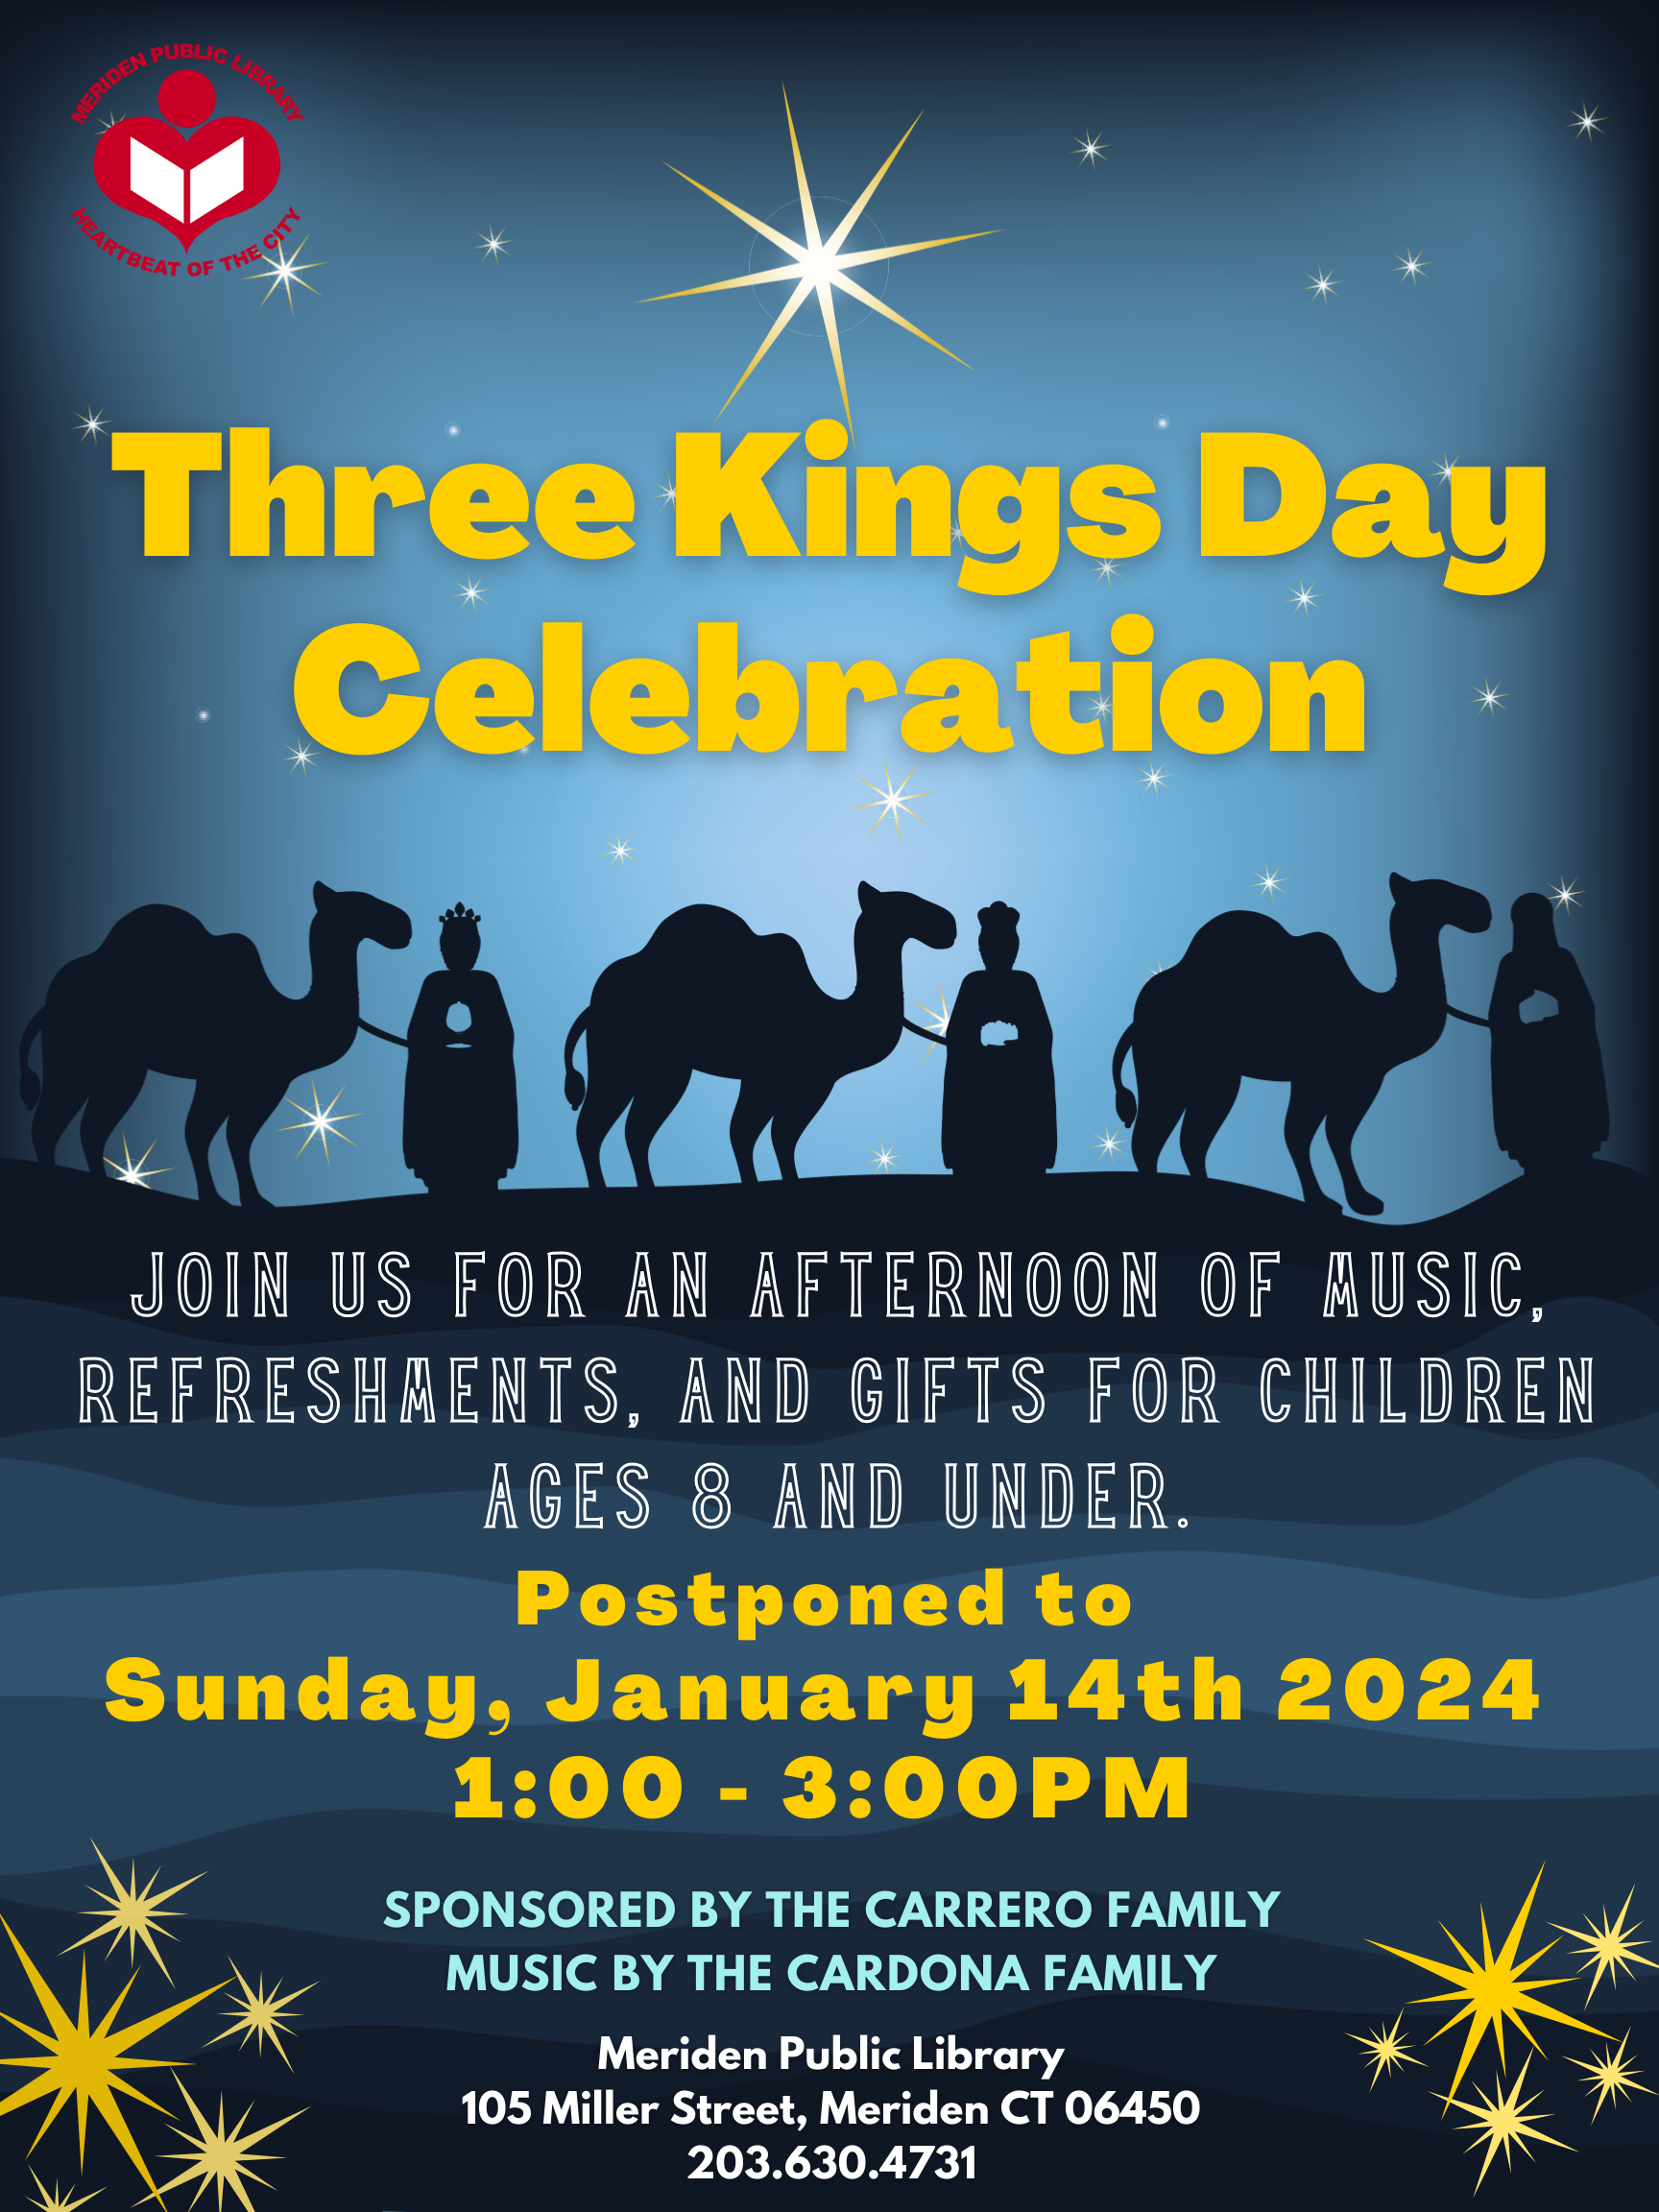 The three kings with camels are silhouetted in black in front of a blue night sky with shining yellow stars